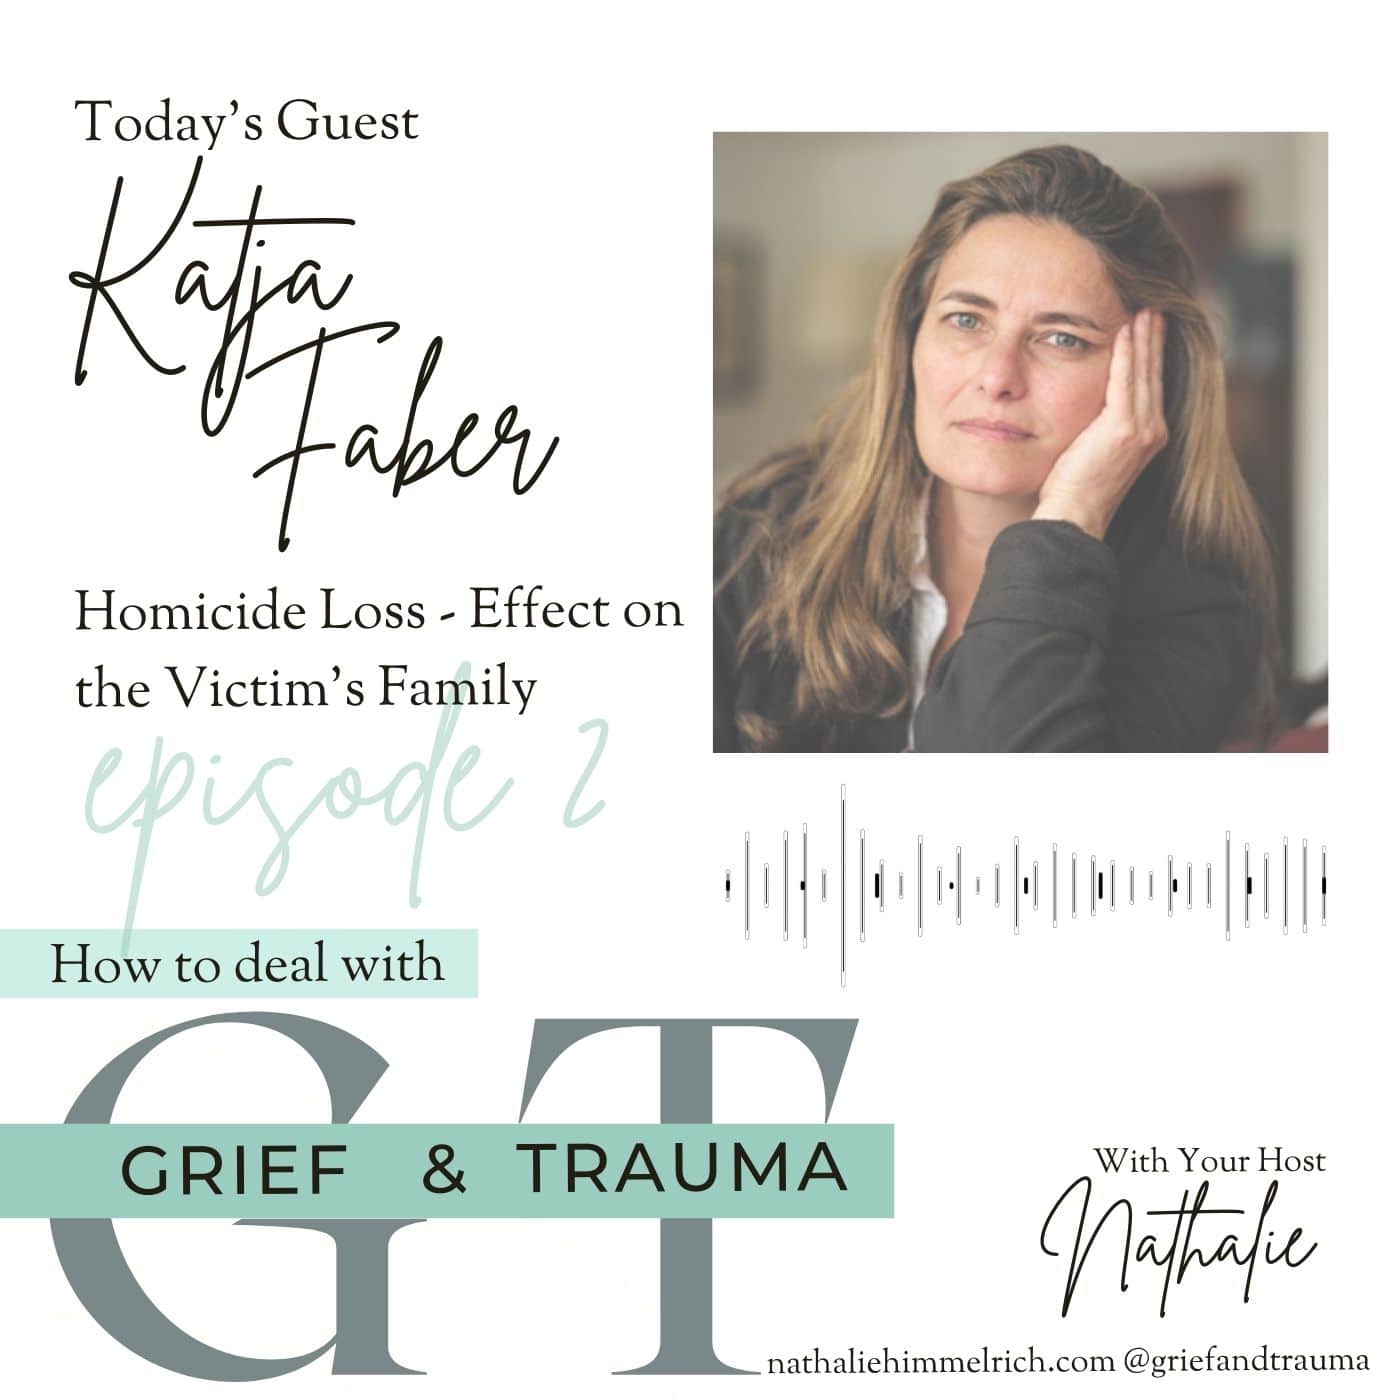 Nathalie with Katja Faber on Homicide Loss – Effect on the Victim’s Family | Episode 2 Part 1